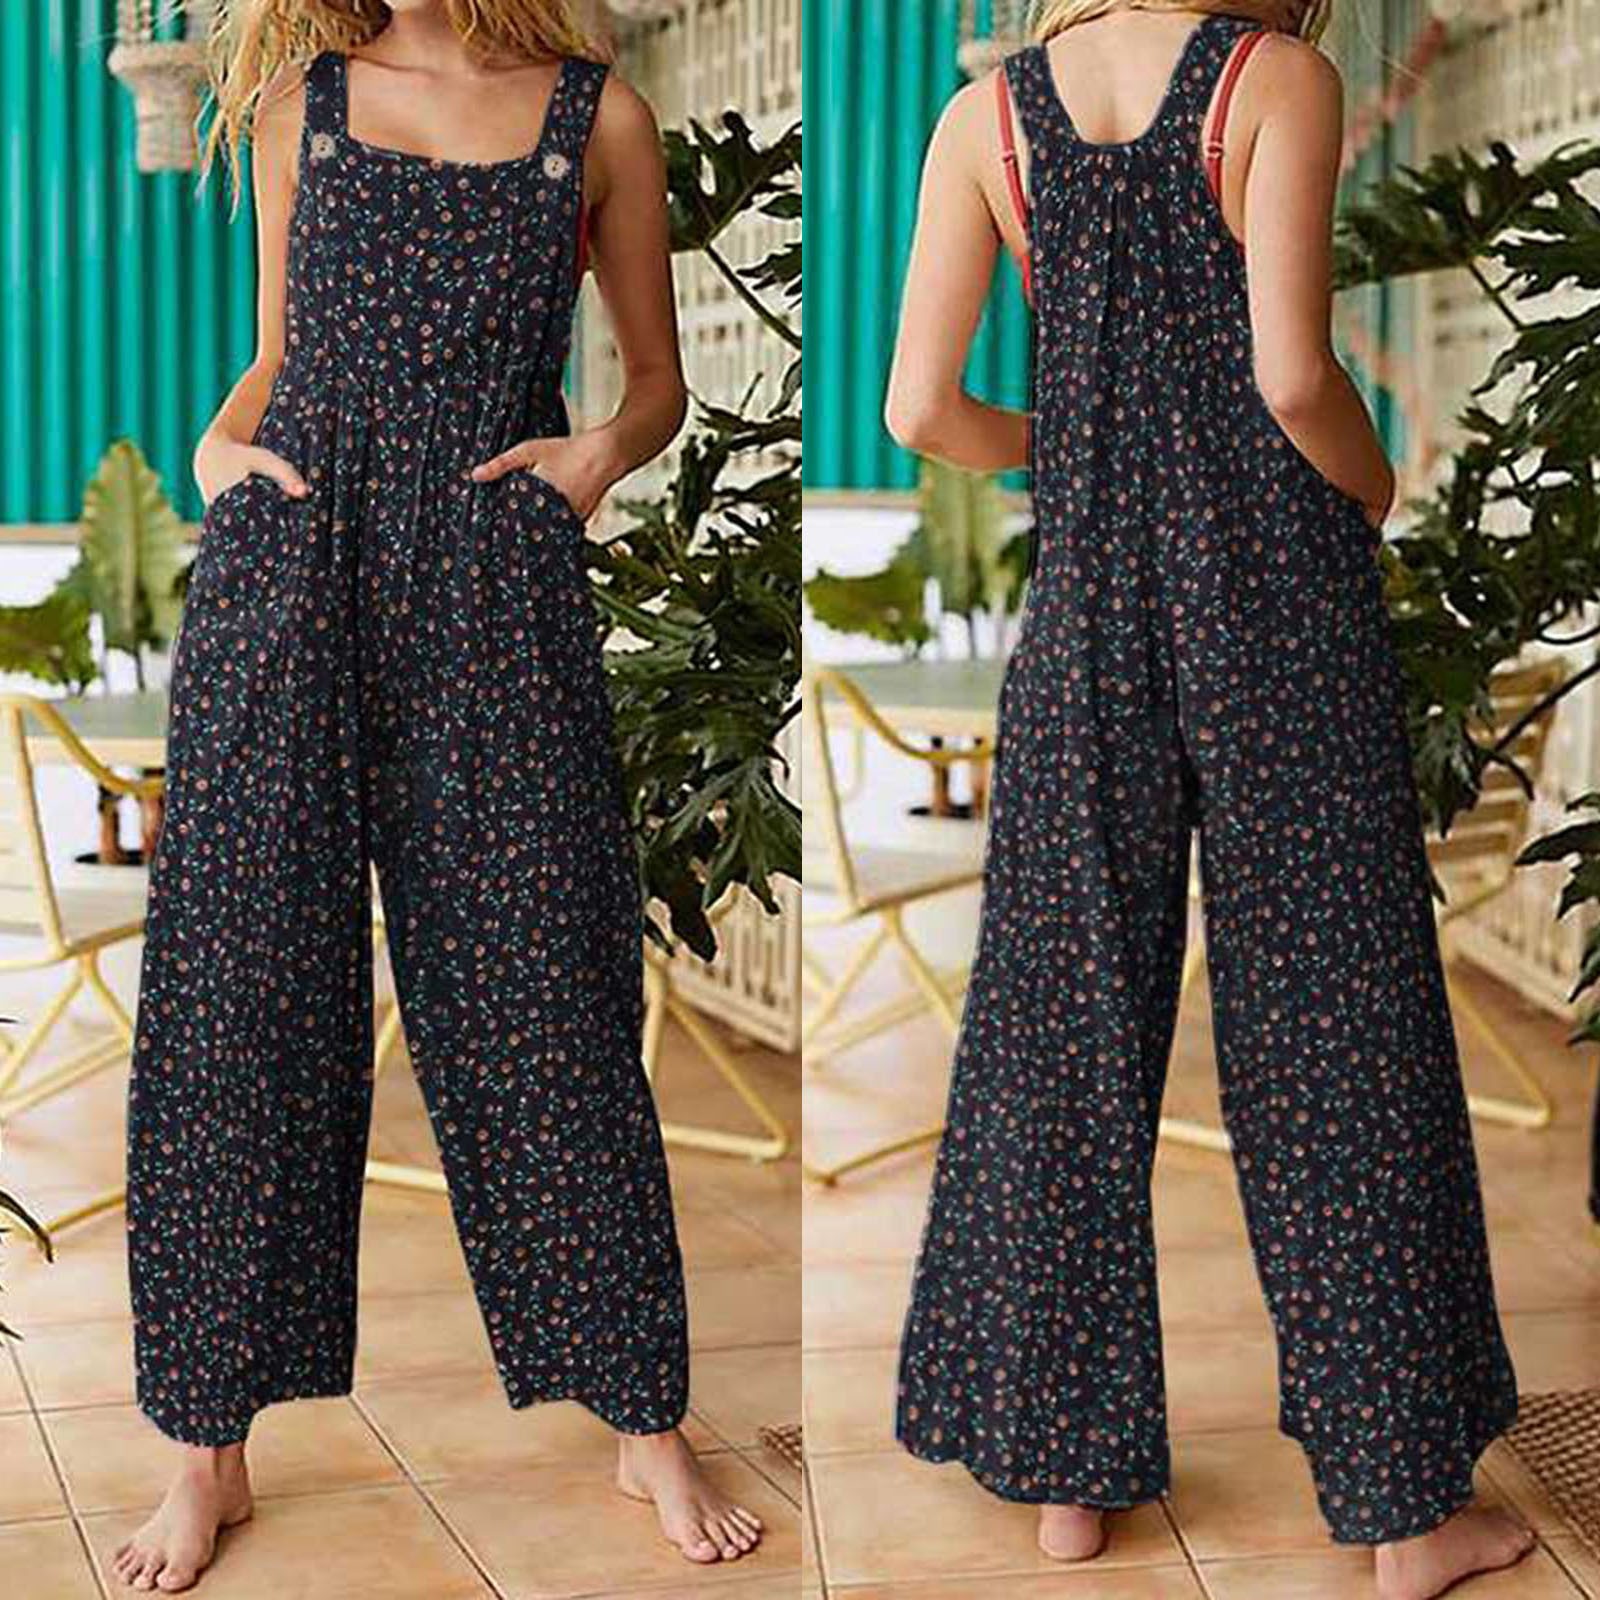 Women's Overalls Casual Baggy Floral Prints Straps Wide Leg with Pockets Vintage Jumpsuit 